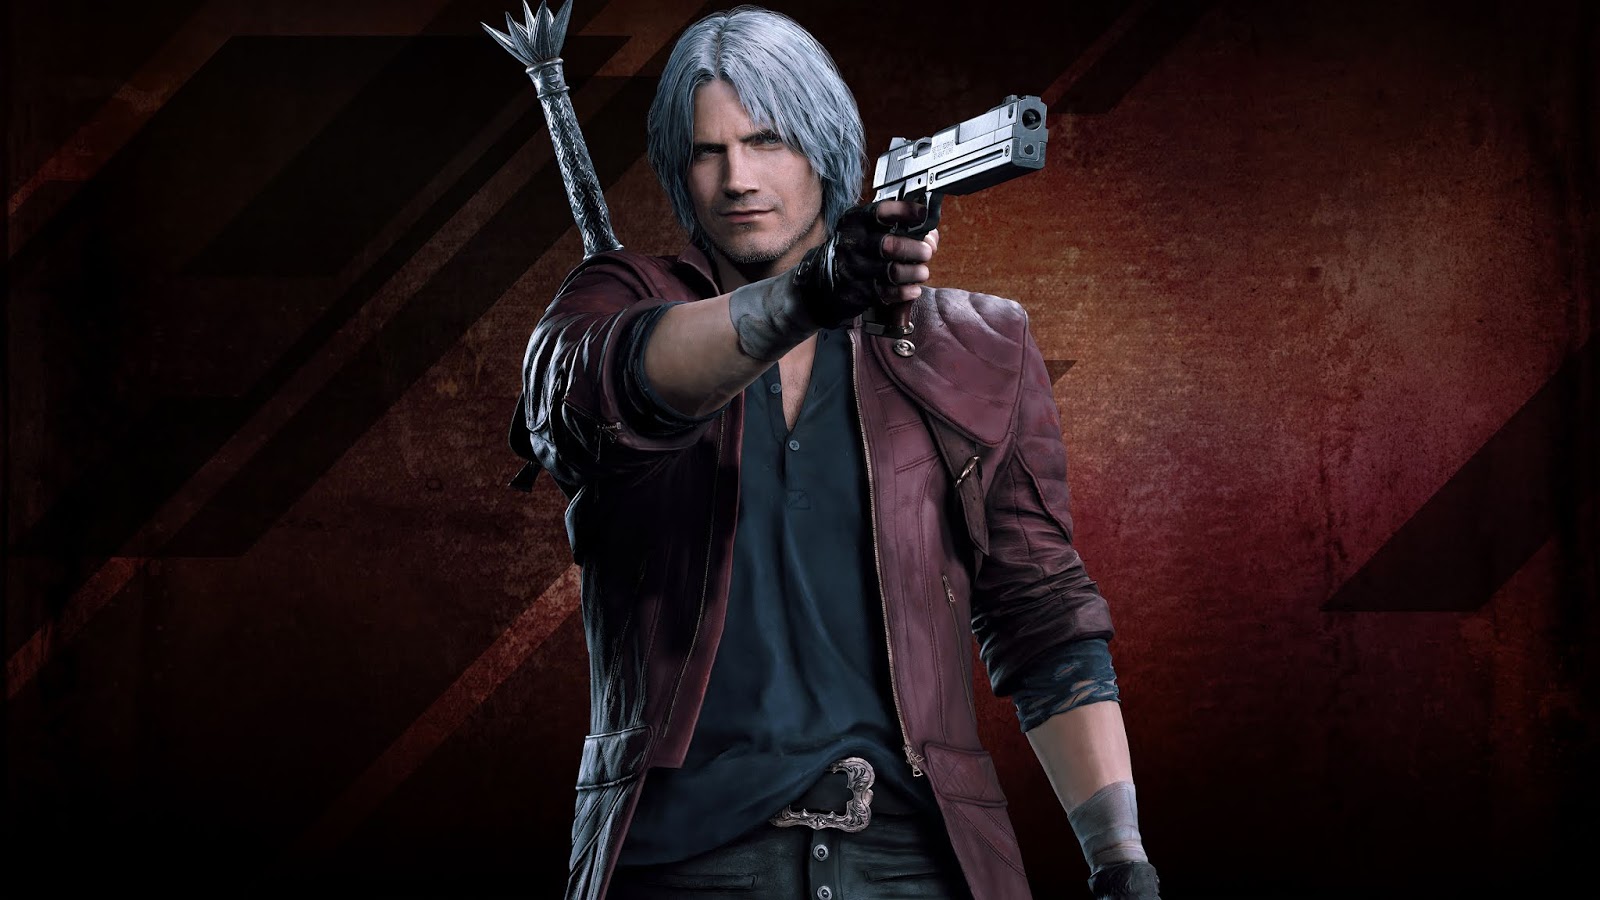 5 Stars - Dante DmC Devil May Cry Cosplay by Leon by